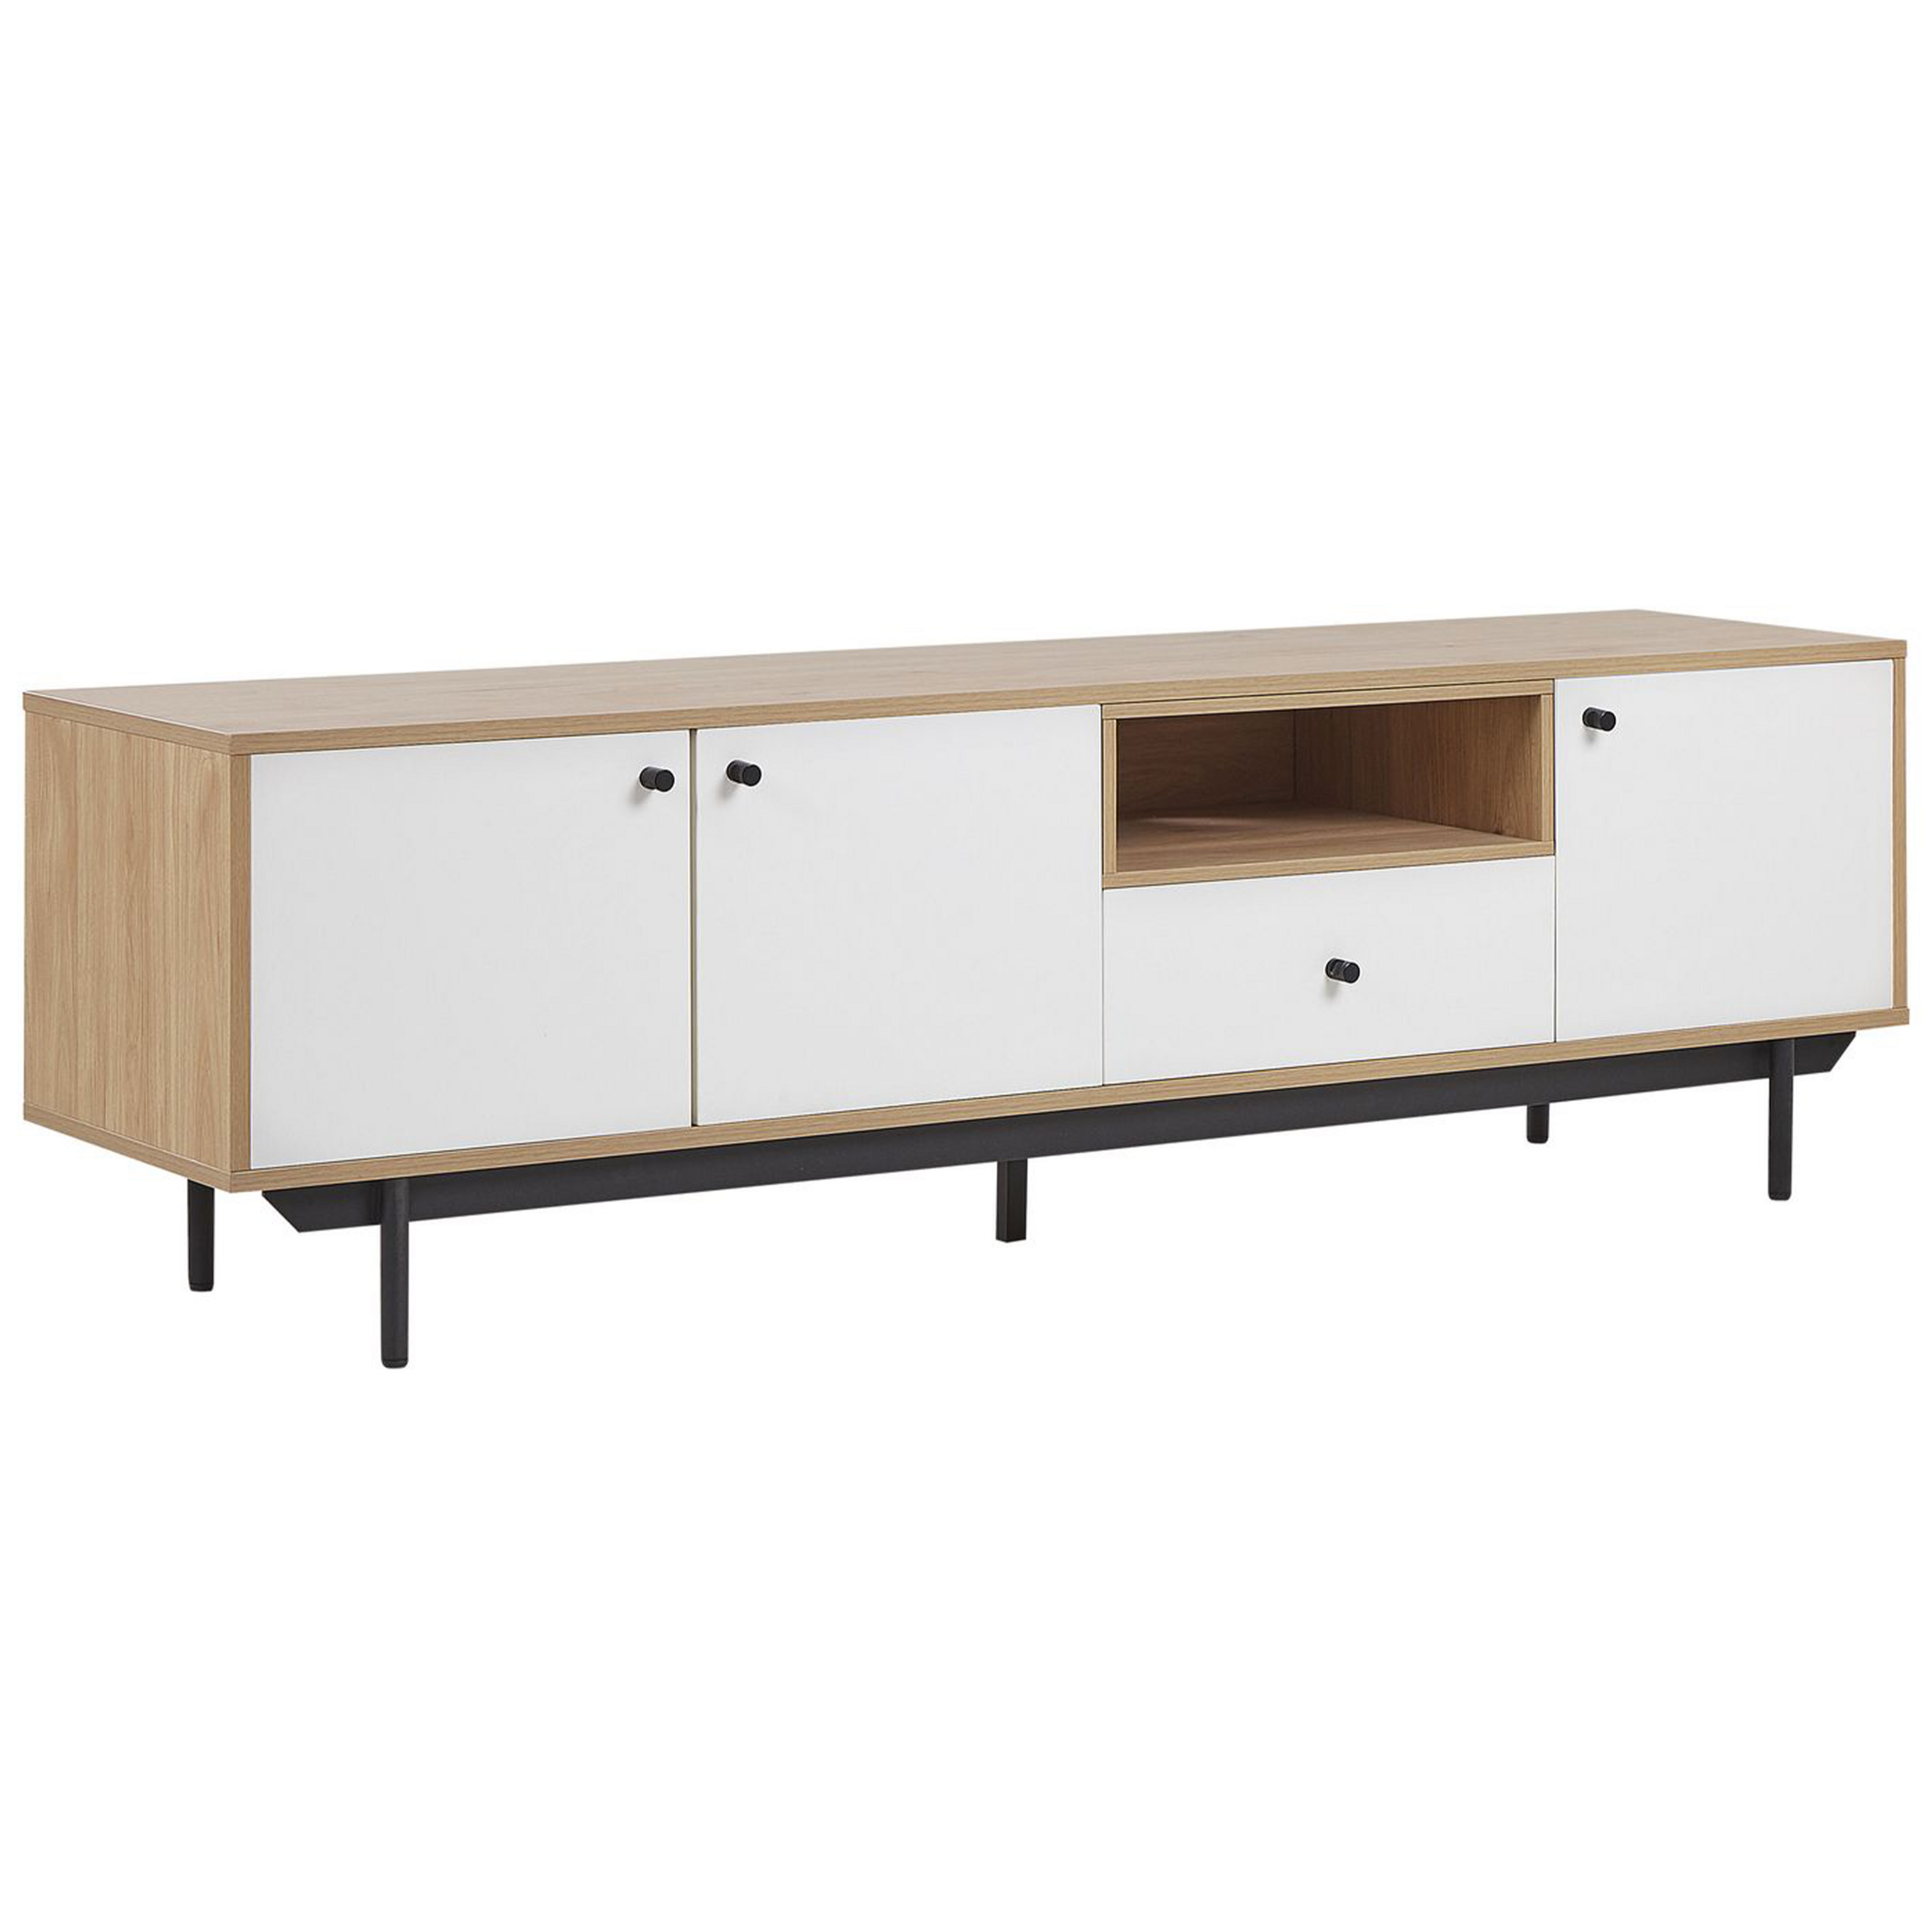 Beliani TV Stand Light Wood with White for up to 75ʺ TV Engineered Wood with Drawer Cabinets and Shelves Cable Management